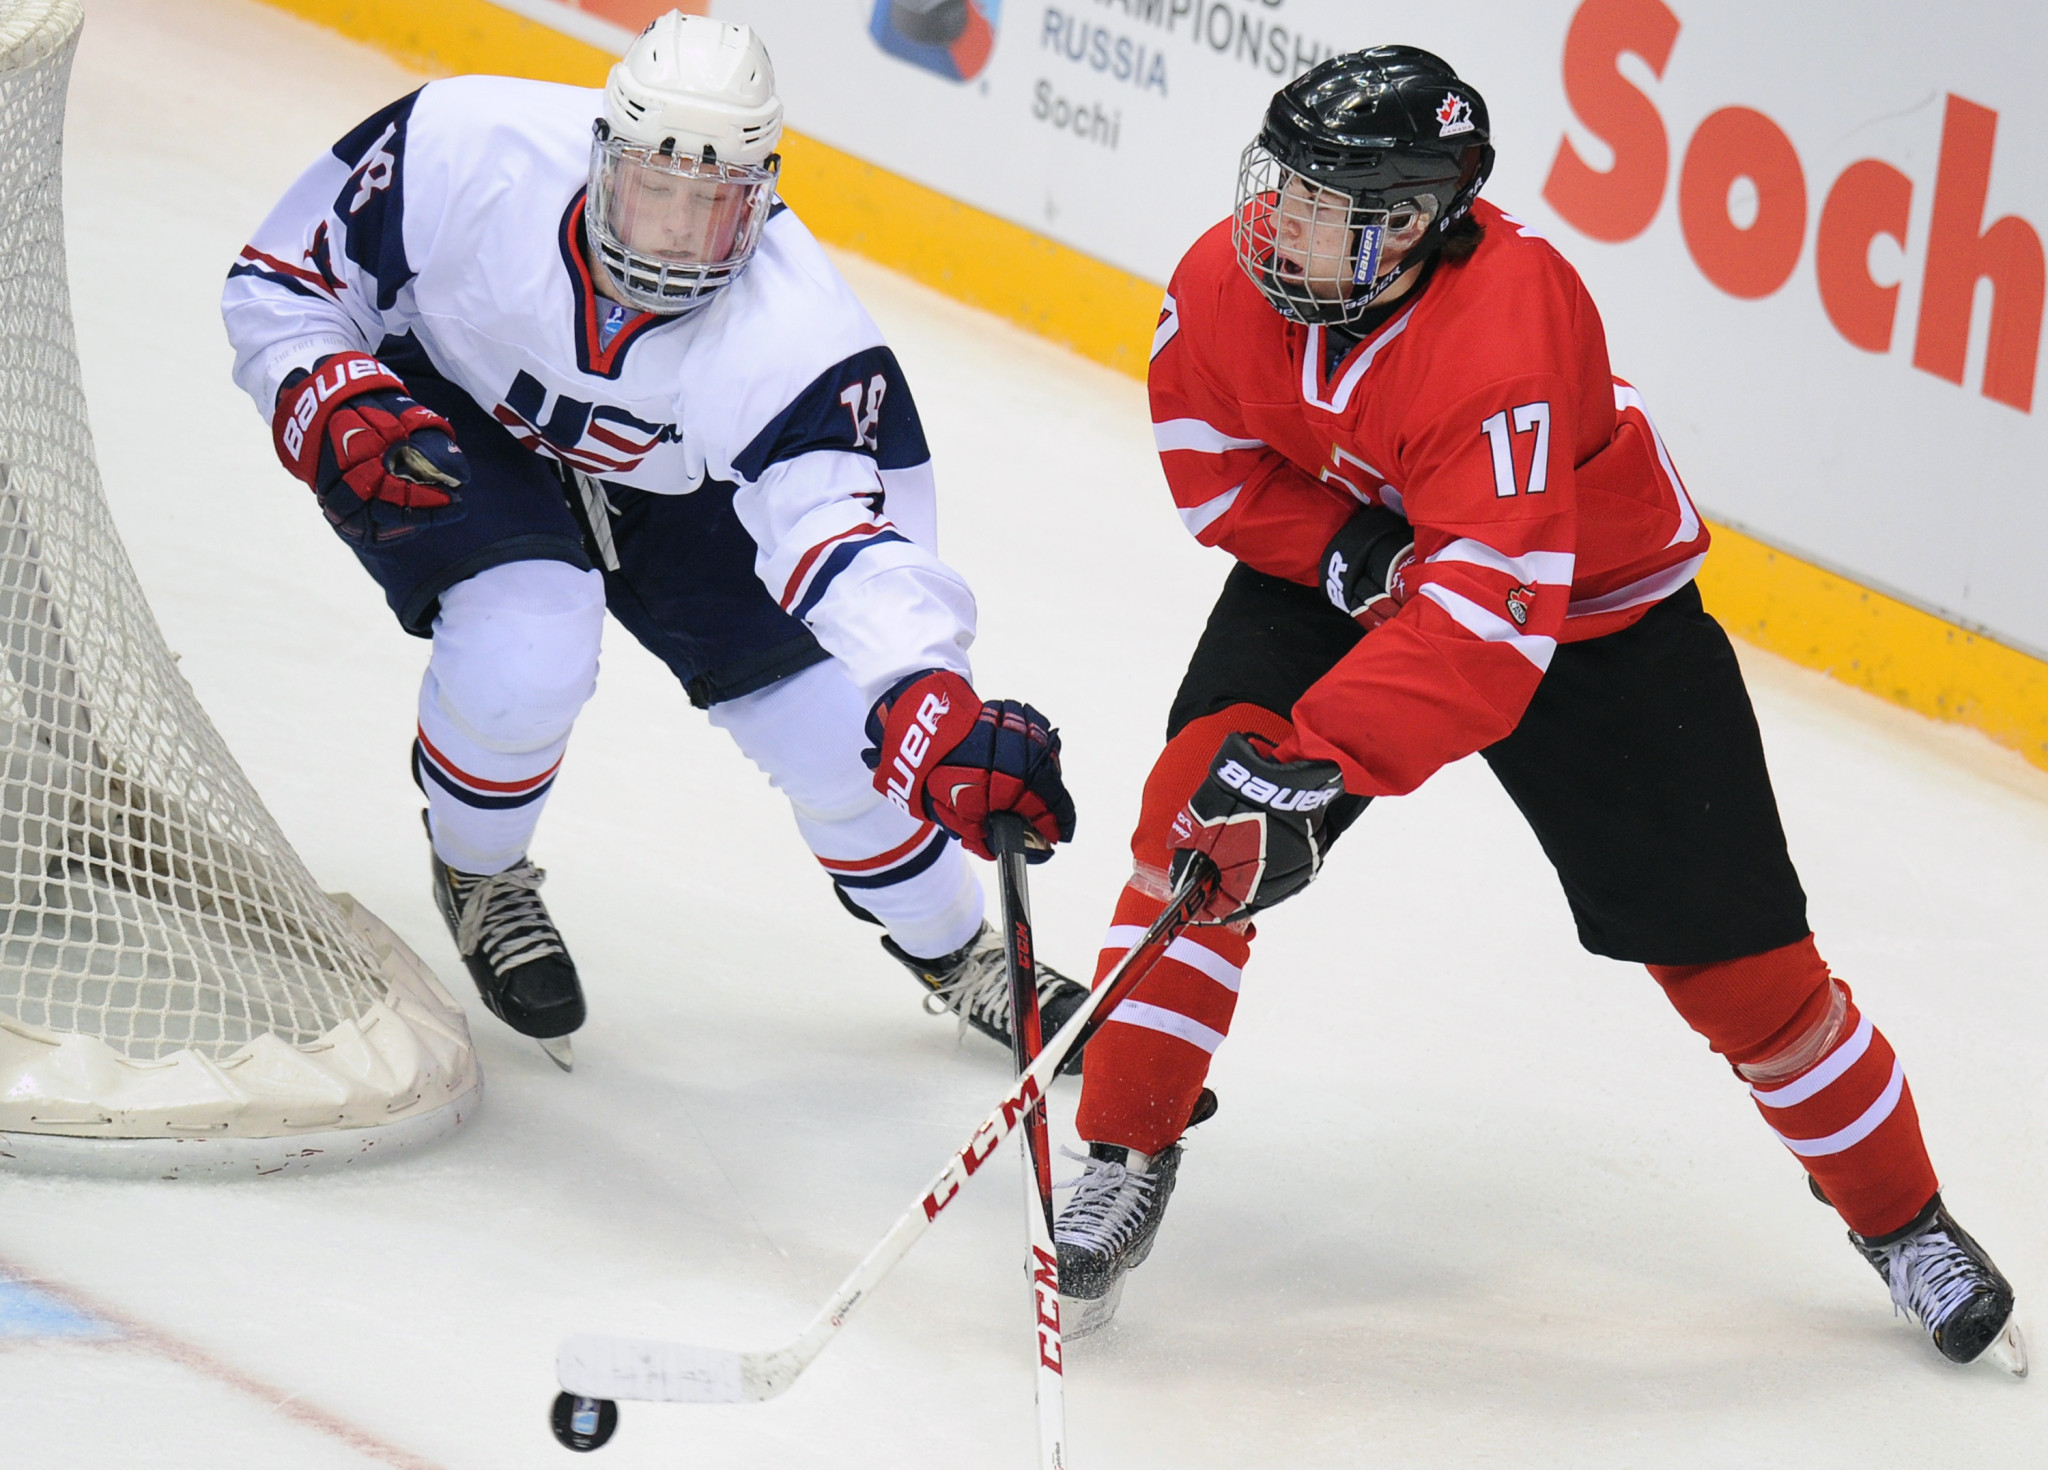 The 2019 IIHF Under-18 World Championship will be the 21st edition of the event ©Getty Images